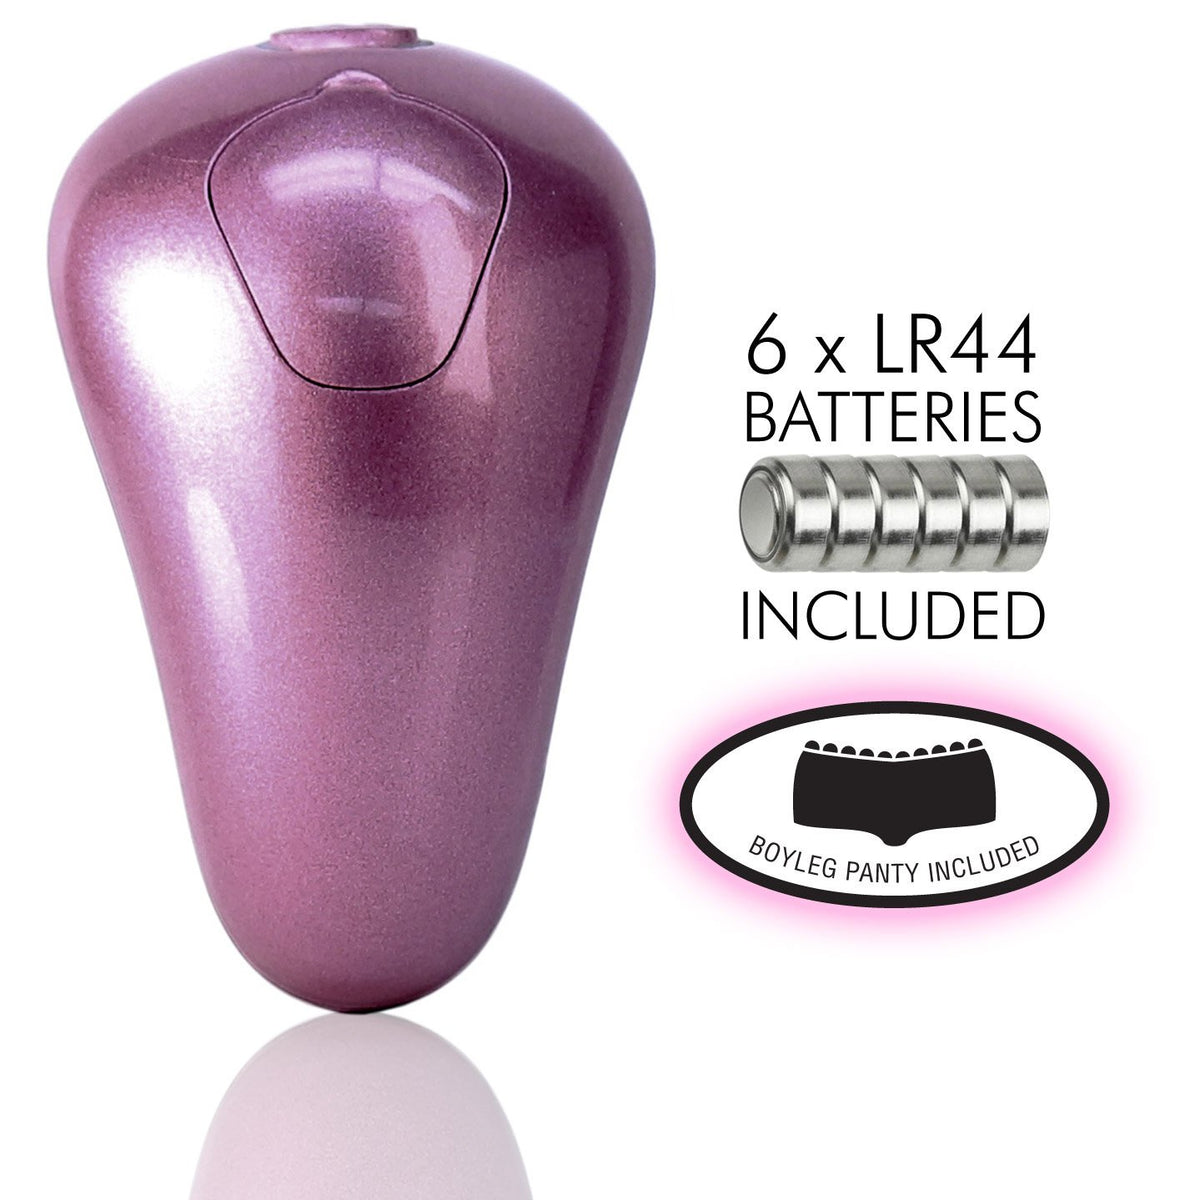 BMS - Panty Vibrator - Battery Operated - Pink - XL